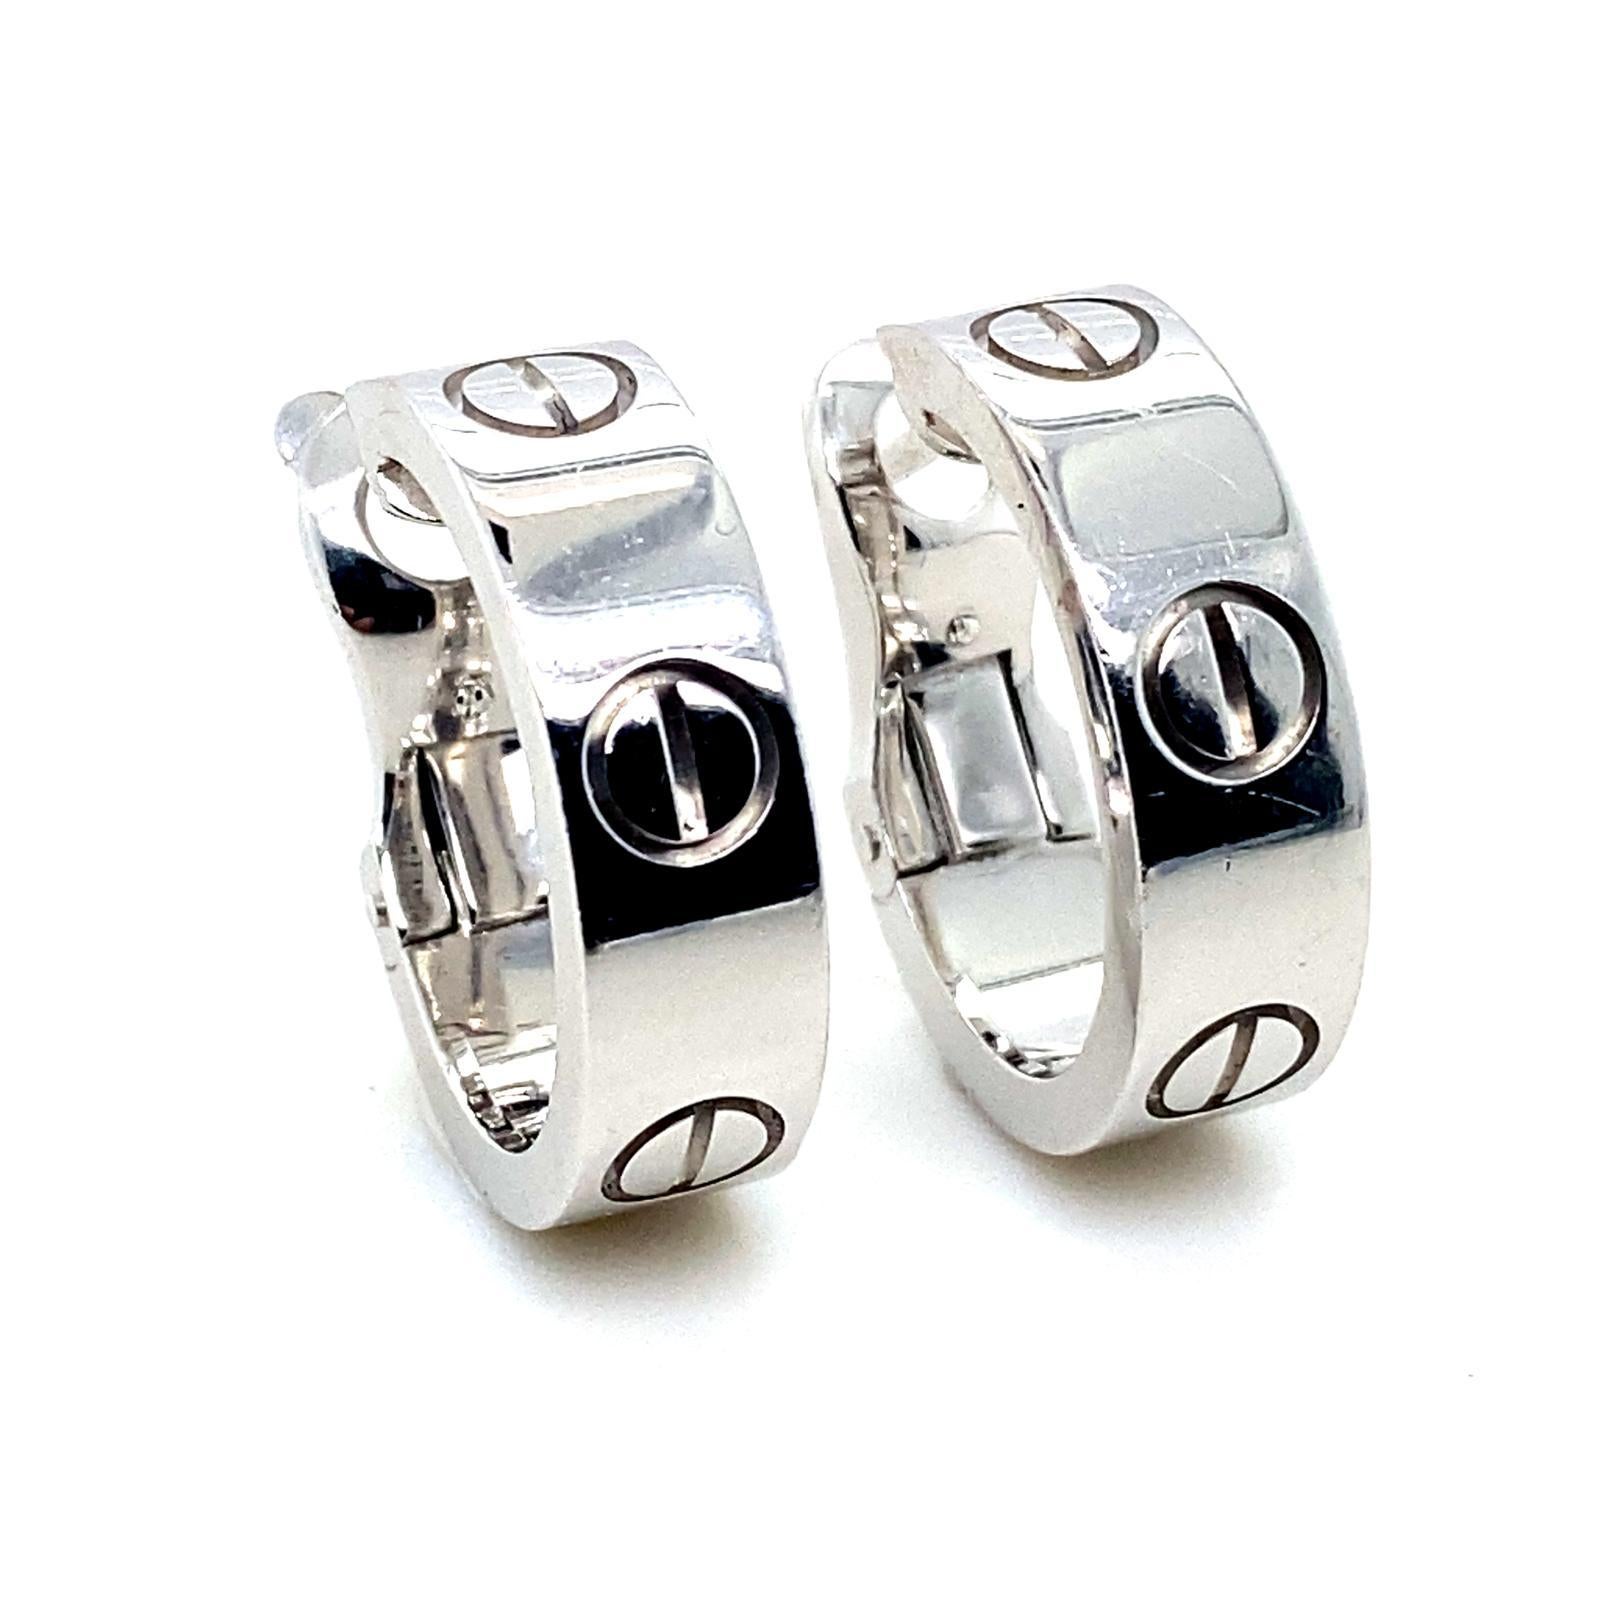 A pair of Cartier Love earrings in 18 karat white gold.

These classic Cartier earrings feature the iconic Love Design, with a polished finish crafted in 18 karat white gold with post and clip fittings.

Signed 